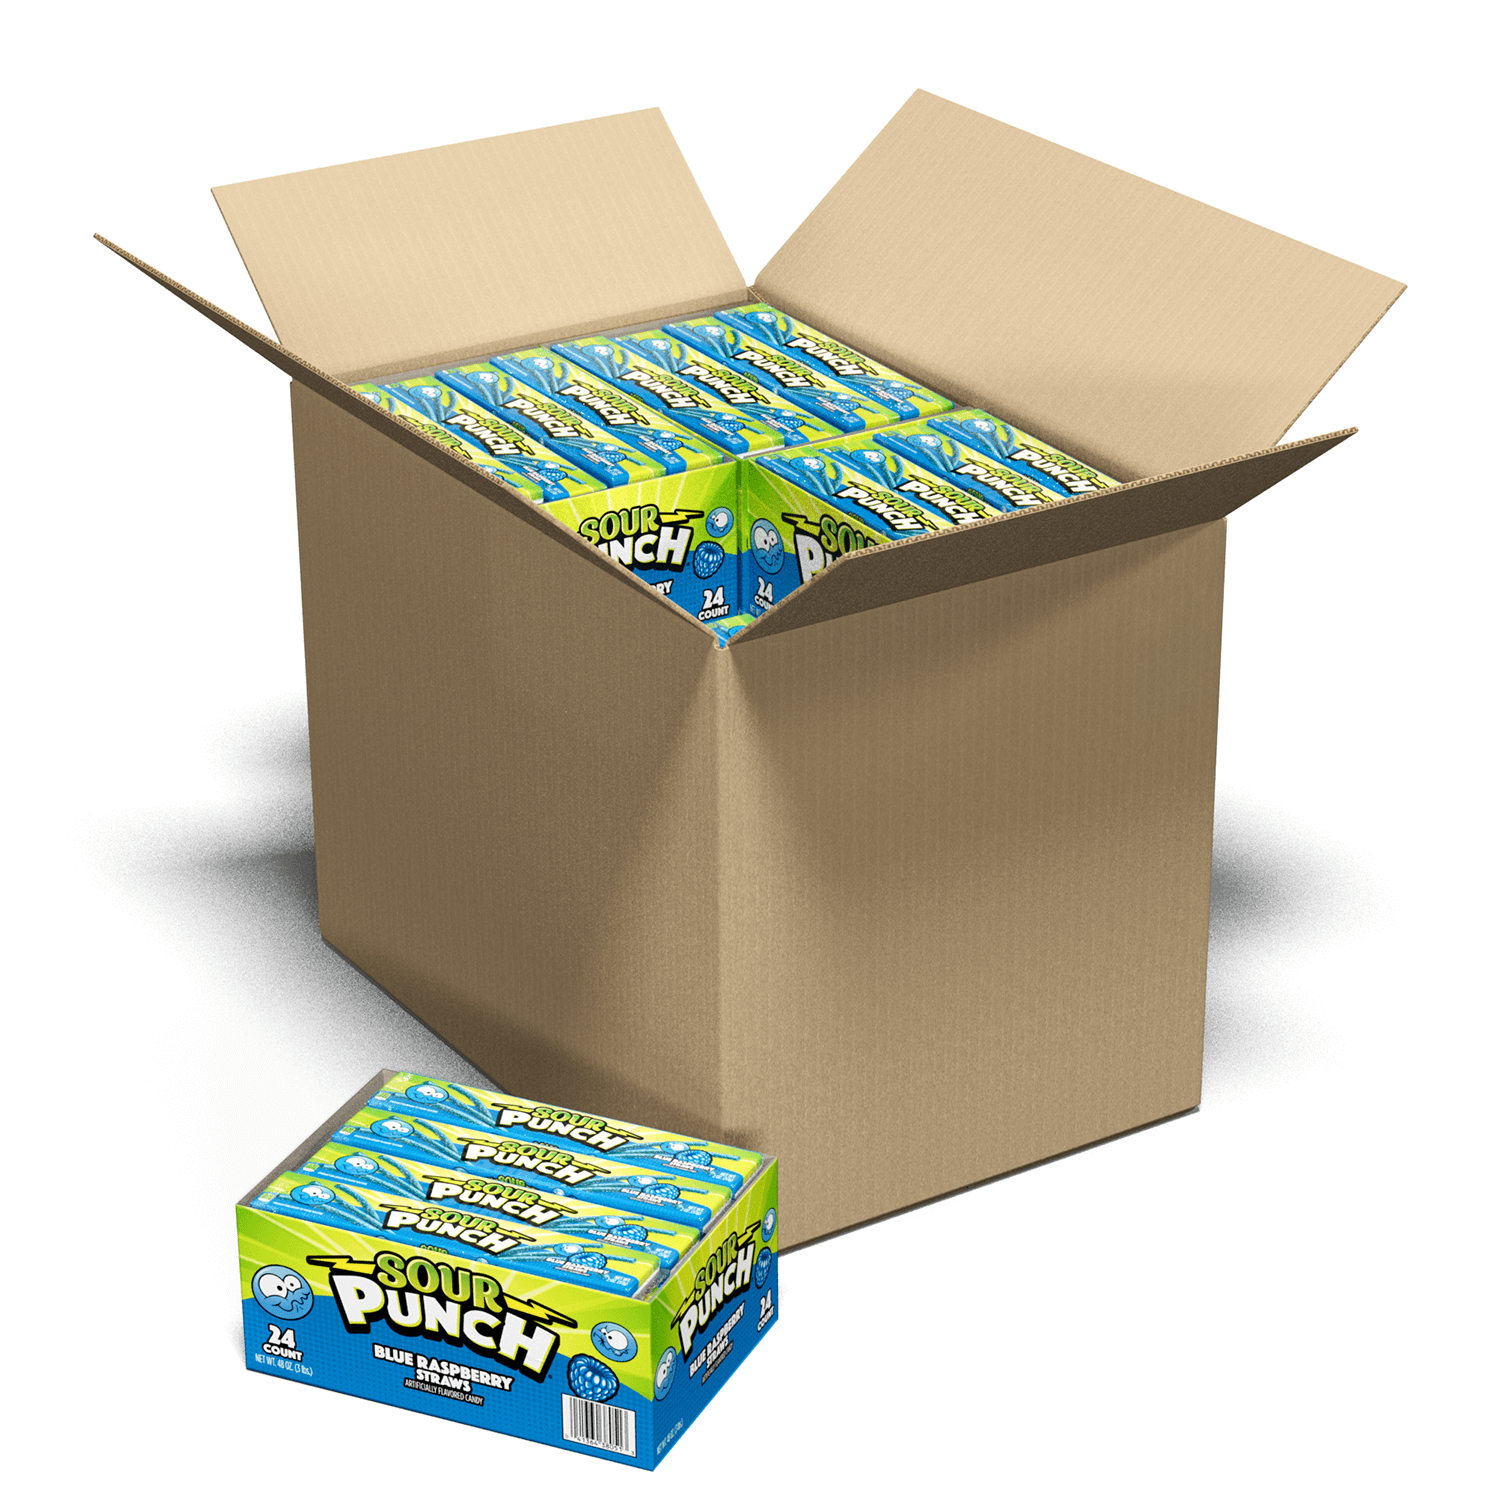 Bulk candy case of Sour Punch Blue Raspberry 2oz Trays - 12 caddies in a case